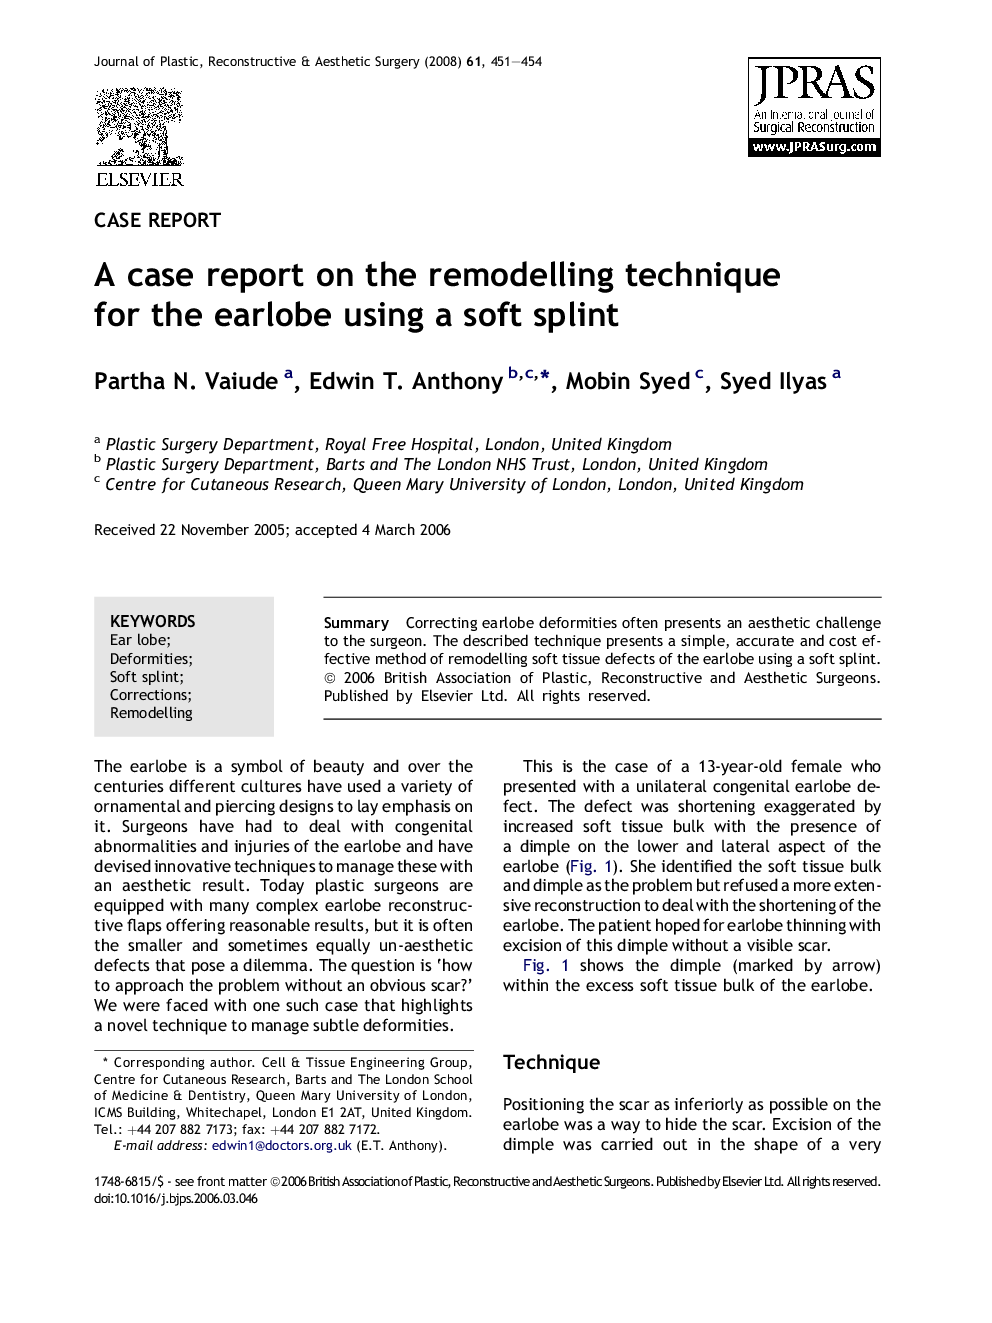 A case report on the remodelling technique for the earlobe using a soft splint